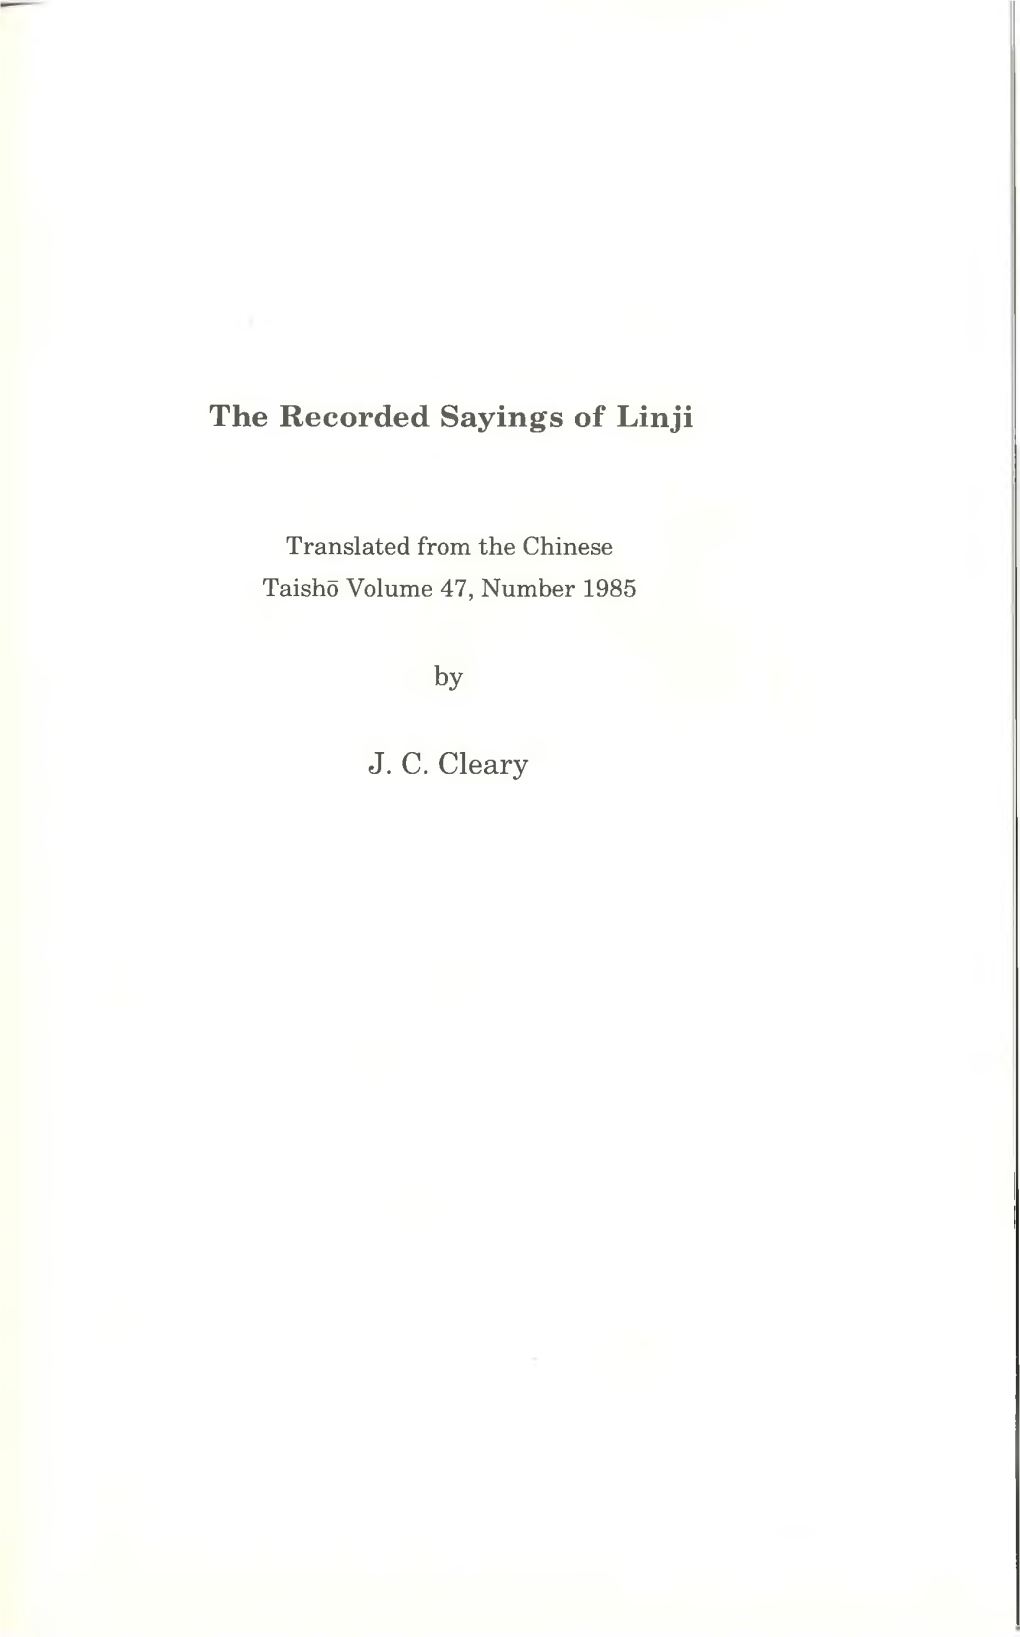 The Recorded Sayings of Linji J. C. Cleary